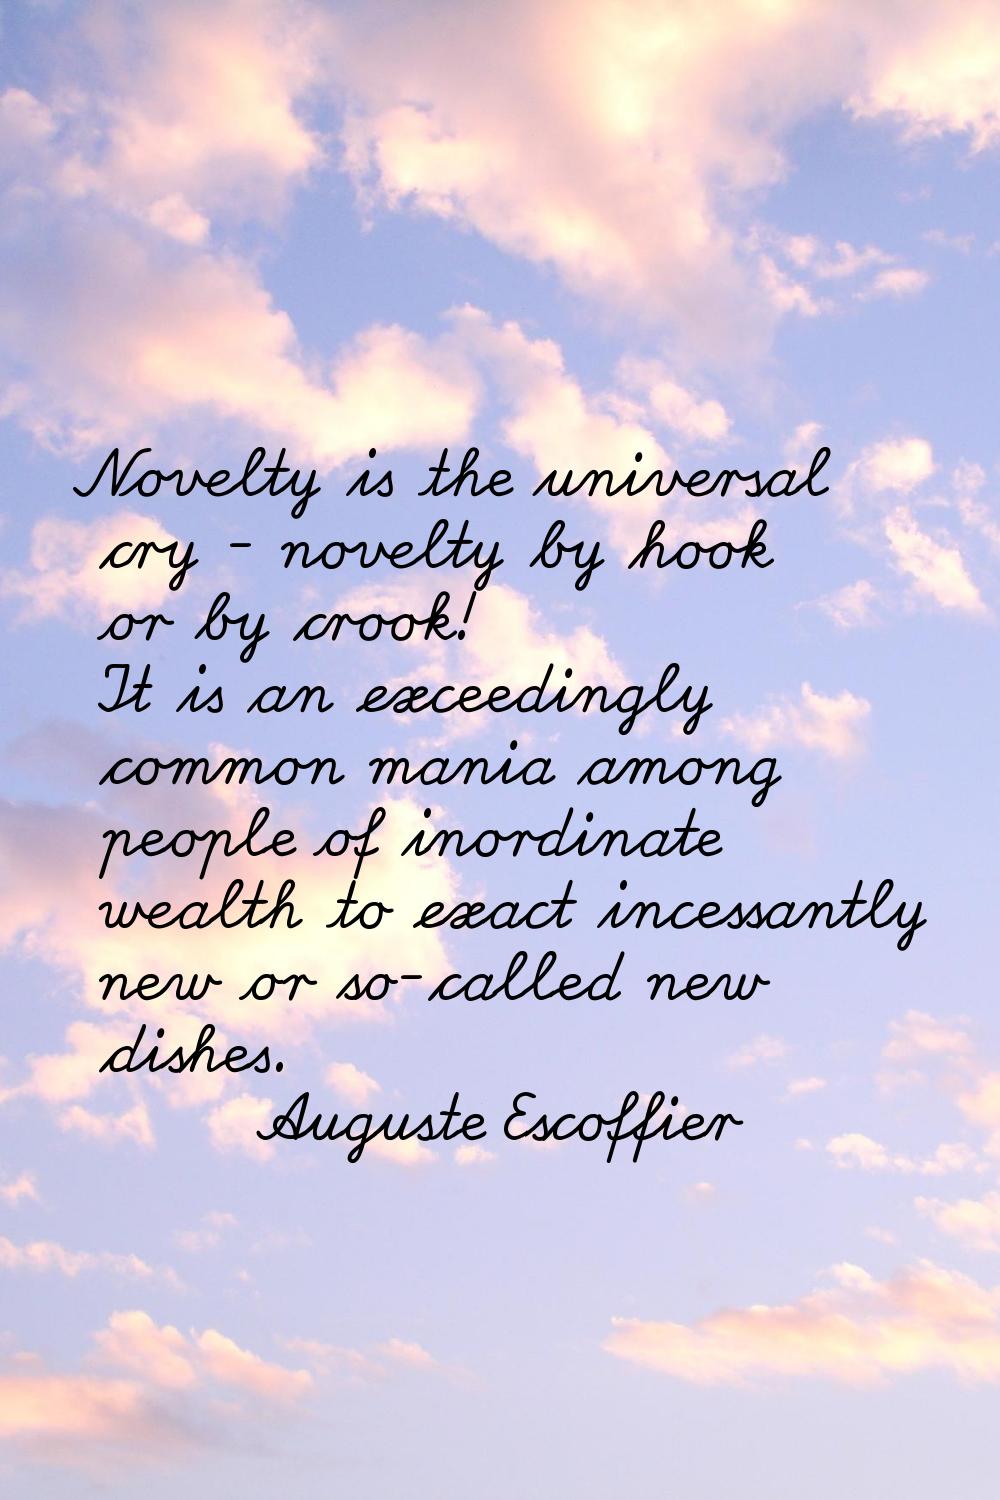 Novelty is the universal cry - novelty by hook or by crook! It is an exceedingly common mania among